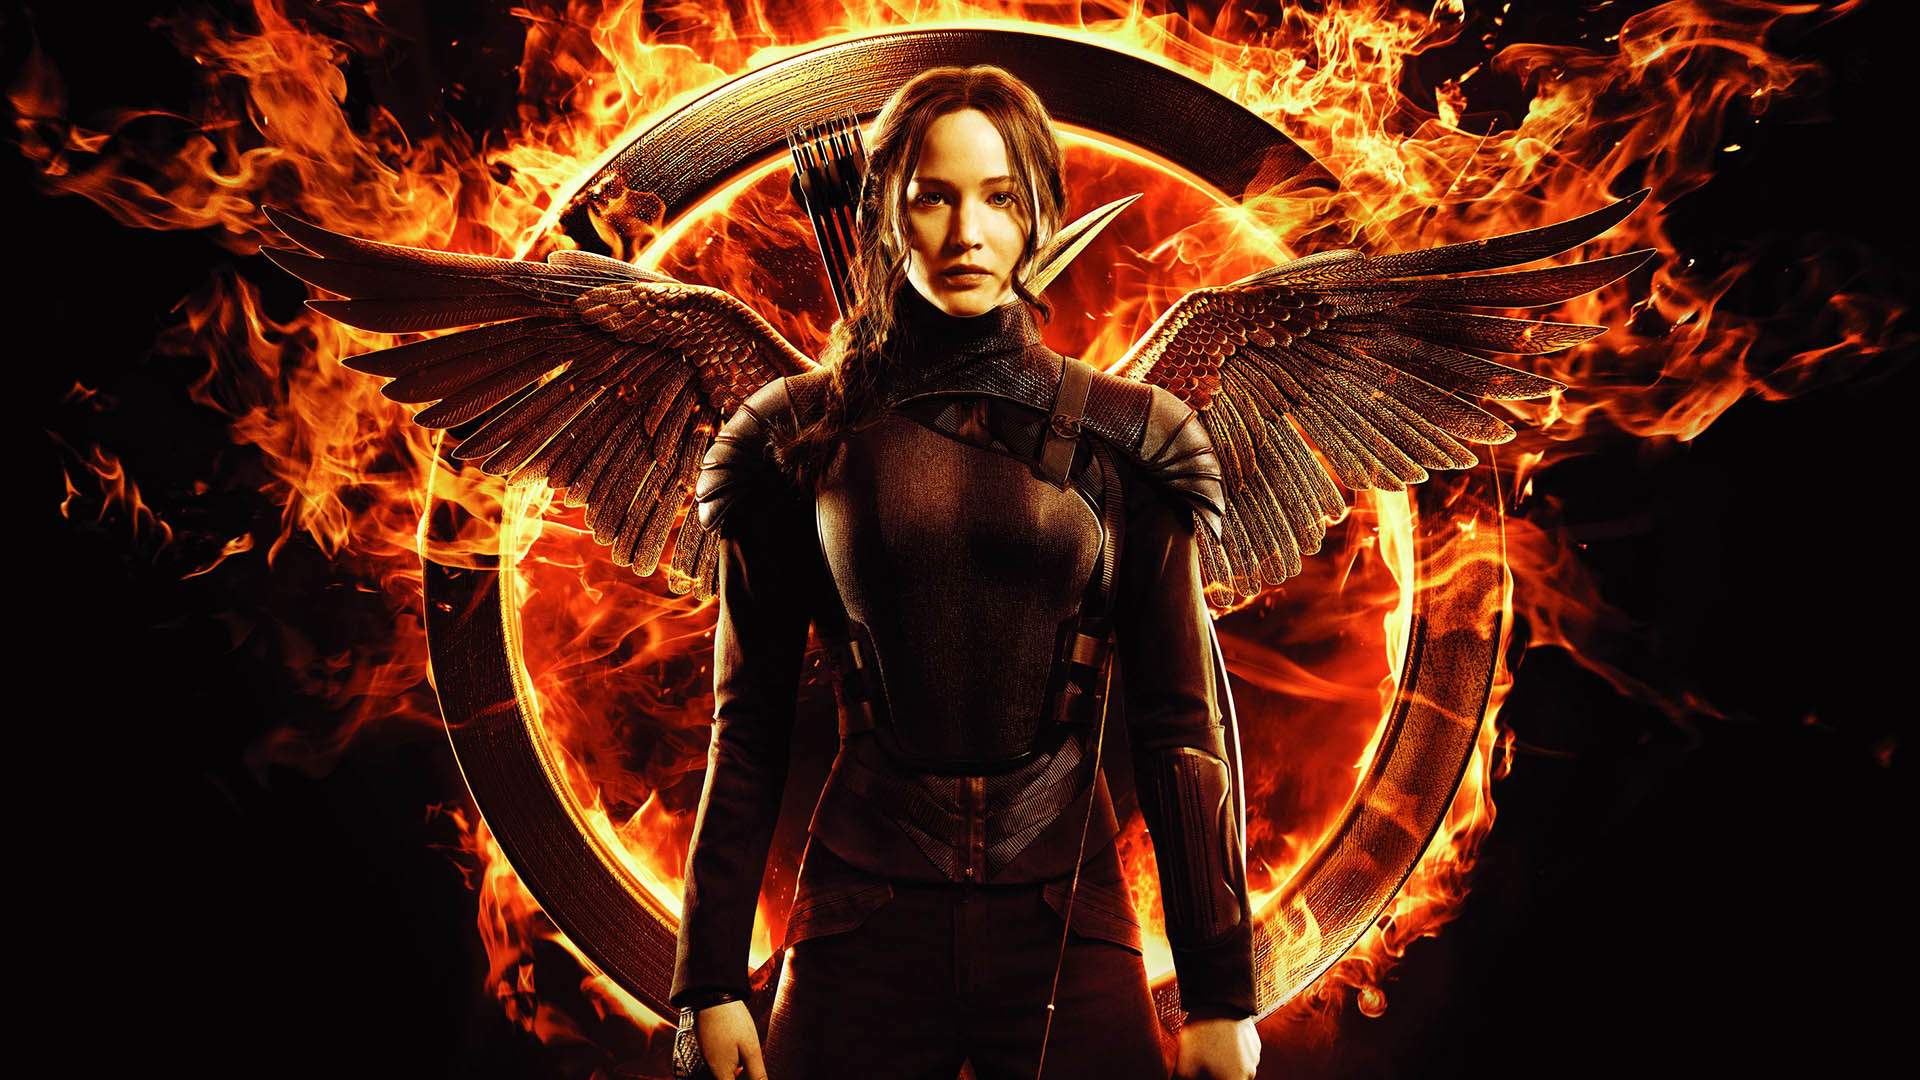 The cover of the movie The Hunger Games with Jennifer Lawrence